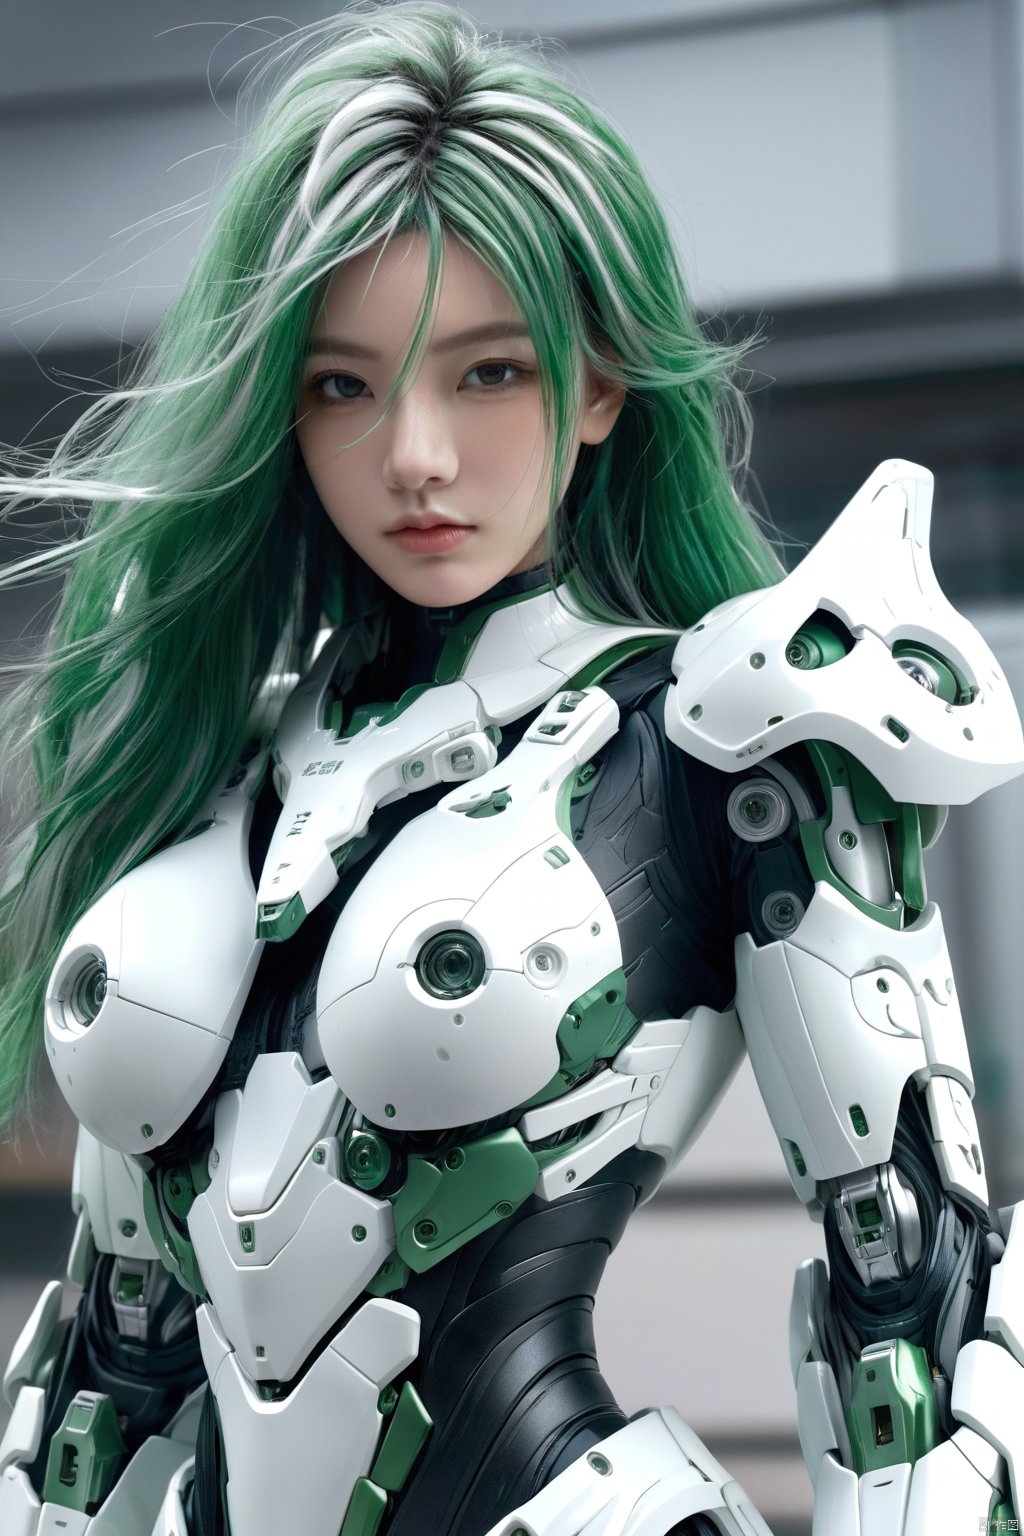  HUBG_Mecha_Armor,
1 girl, huge breasts, big chest,full body:1.5, messy green long hair, realistic, perfect murge, white Mecha body,Young beauty spirit .Best Quality, photorealistic, ultra-detailed, finely detailed, high resolution, perfect dynamic composition, sharp-focus,b3rli,dongtan dress,

taken by Canon EOS,SIGMA Art Lens 35mm F1.4,ISO 200 Shutter Speed 2000,Vivid picture,